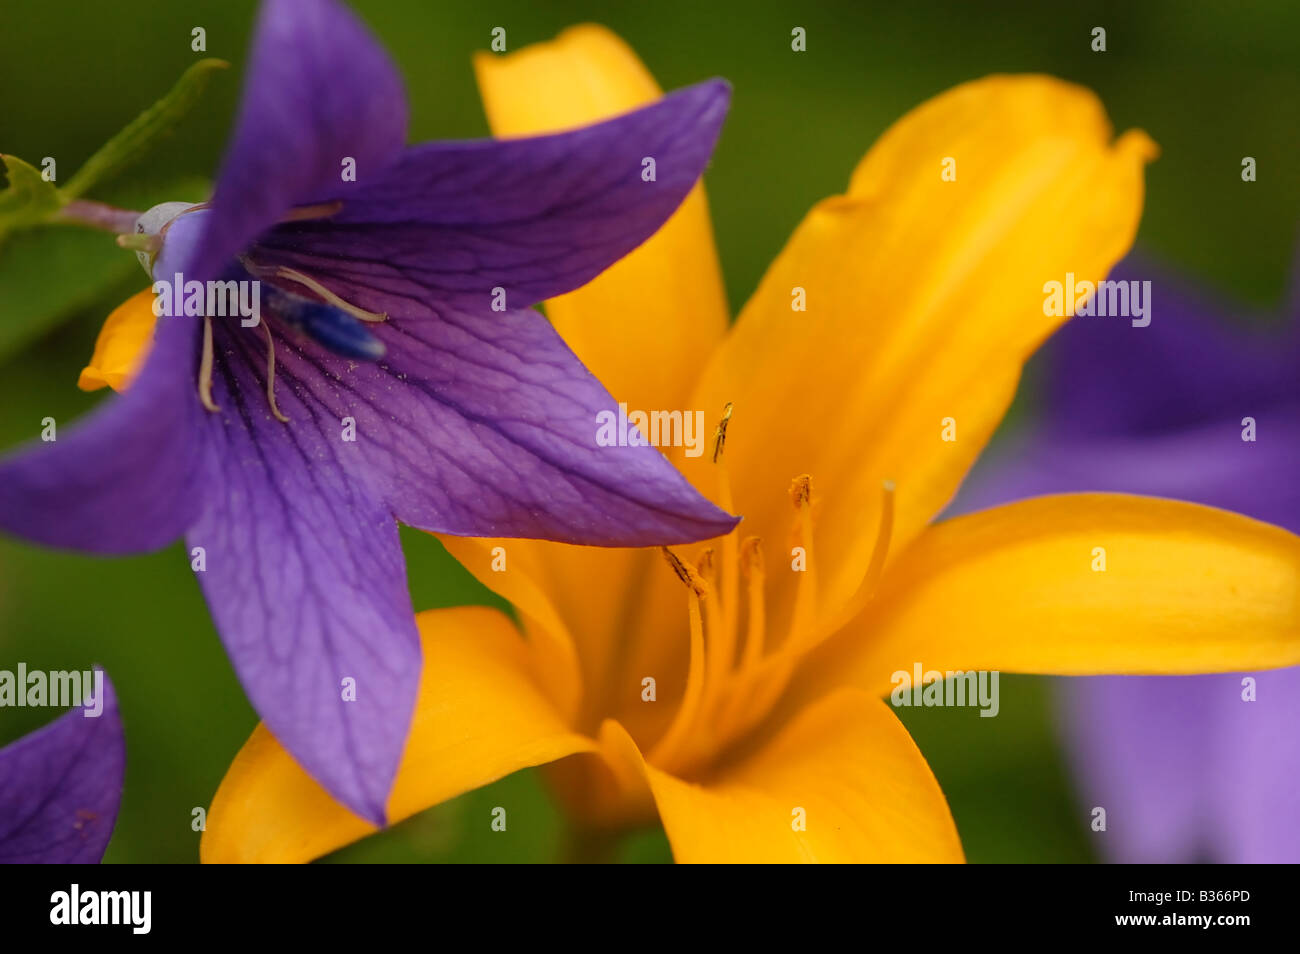 A purple Brodiaea, also called Grassnut or Ithuriel's Spear, sitting in front of a yellow Day Lily. Stock Photo